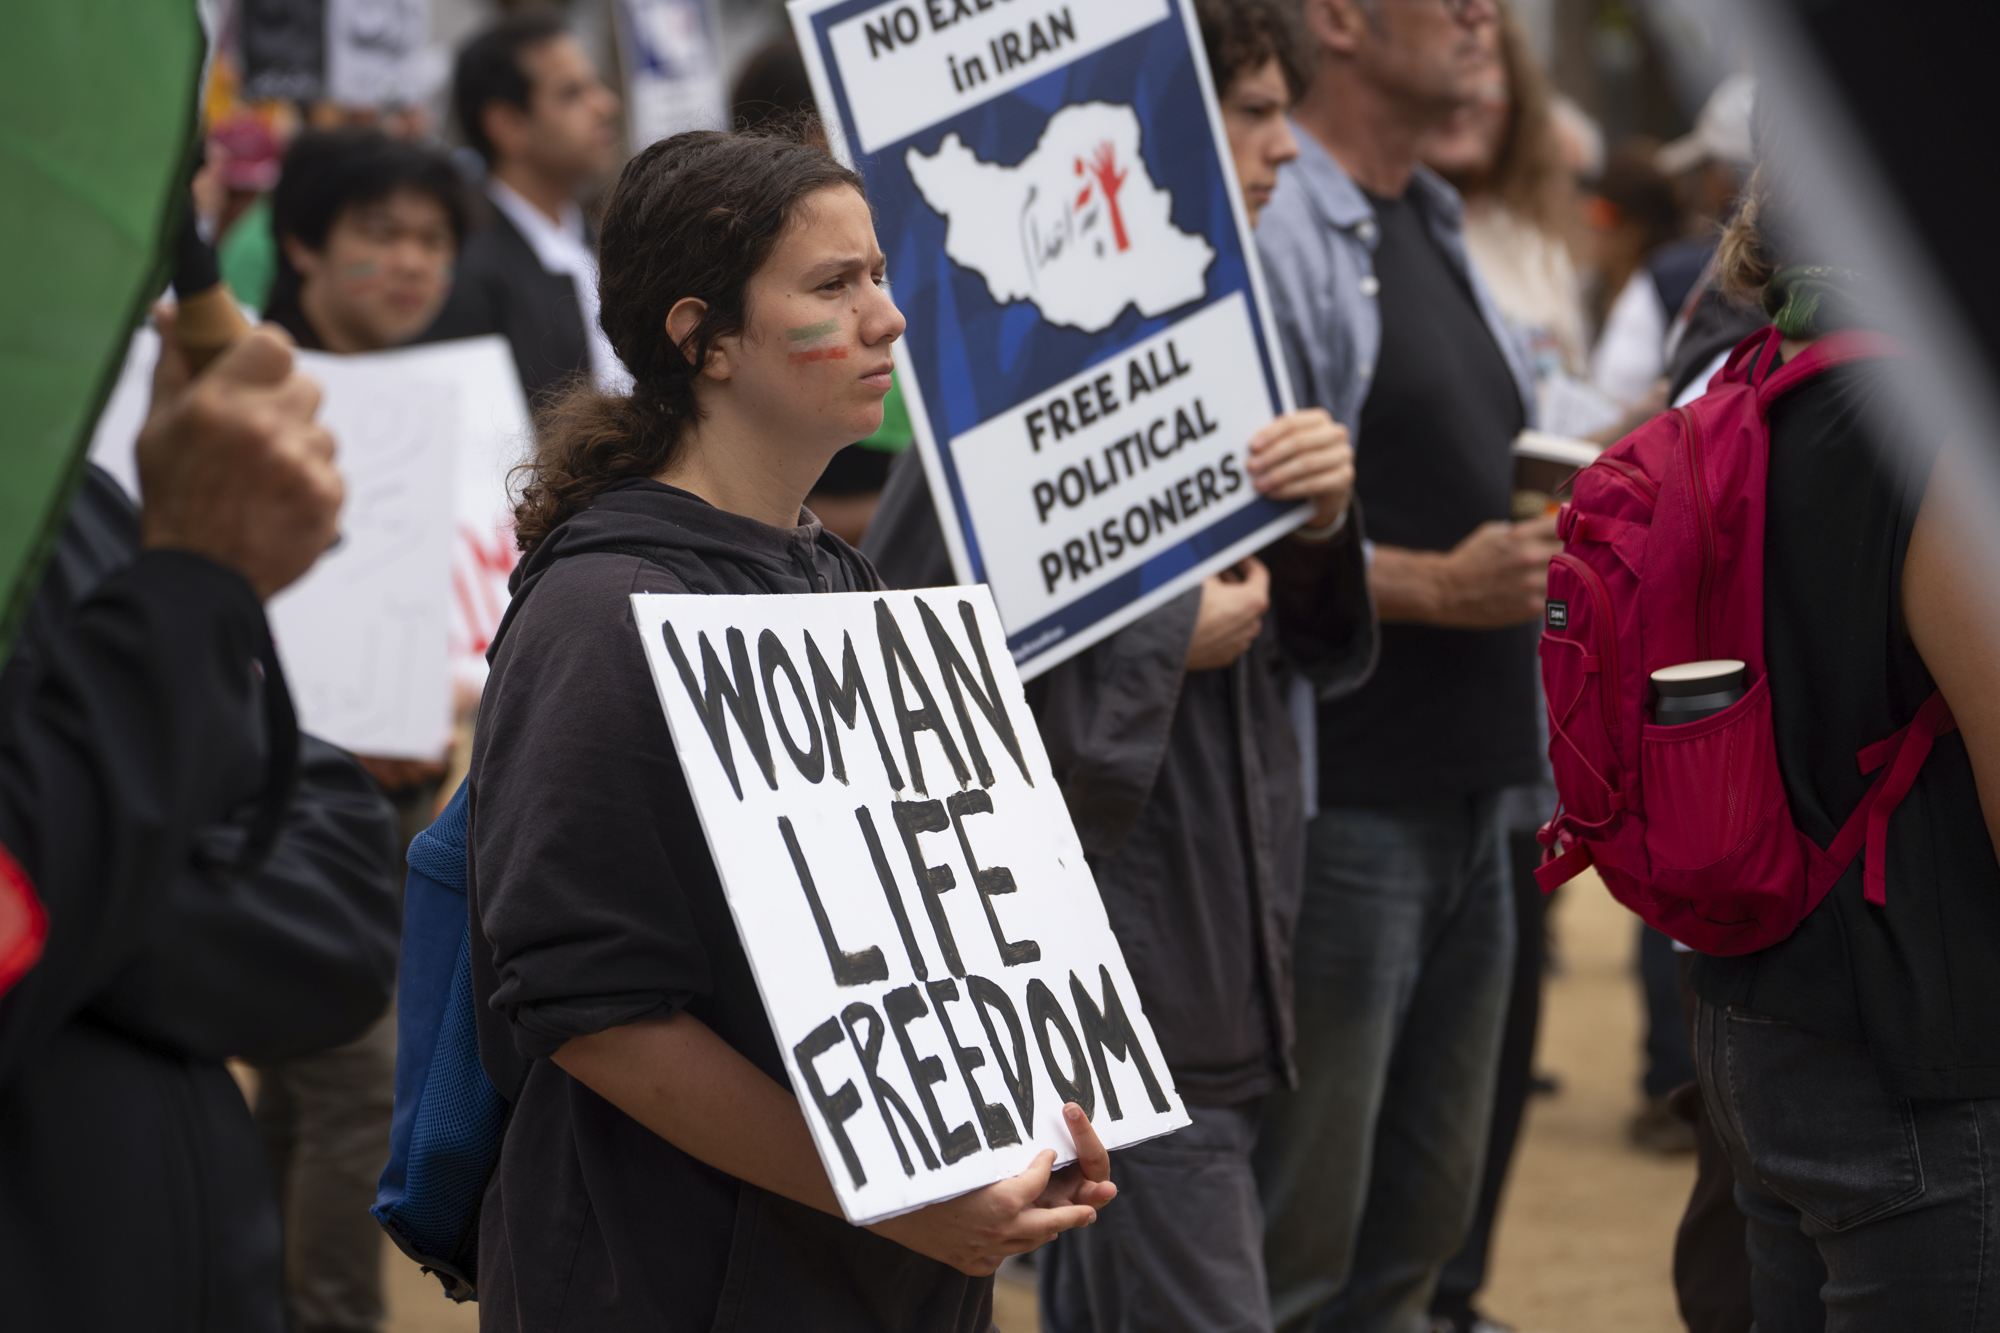 A person holds a sign reading "Woman Life Freedom" in a group of people.